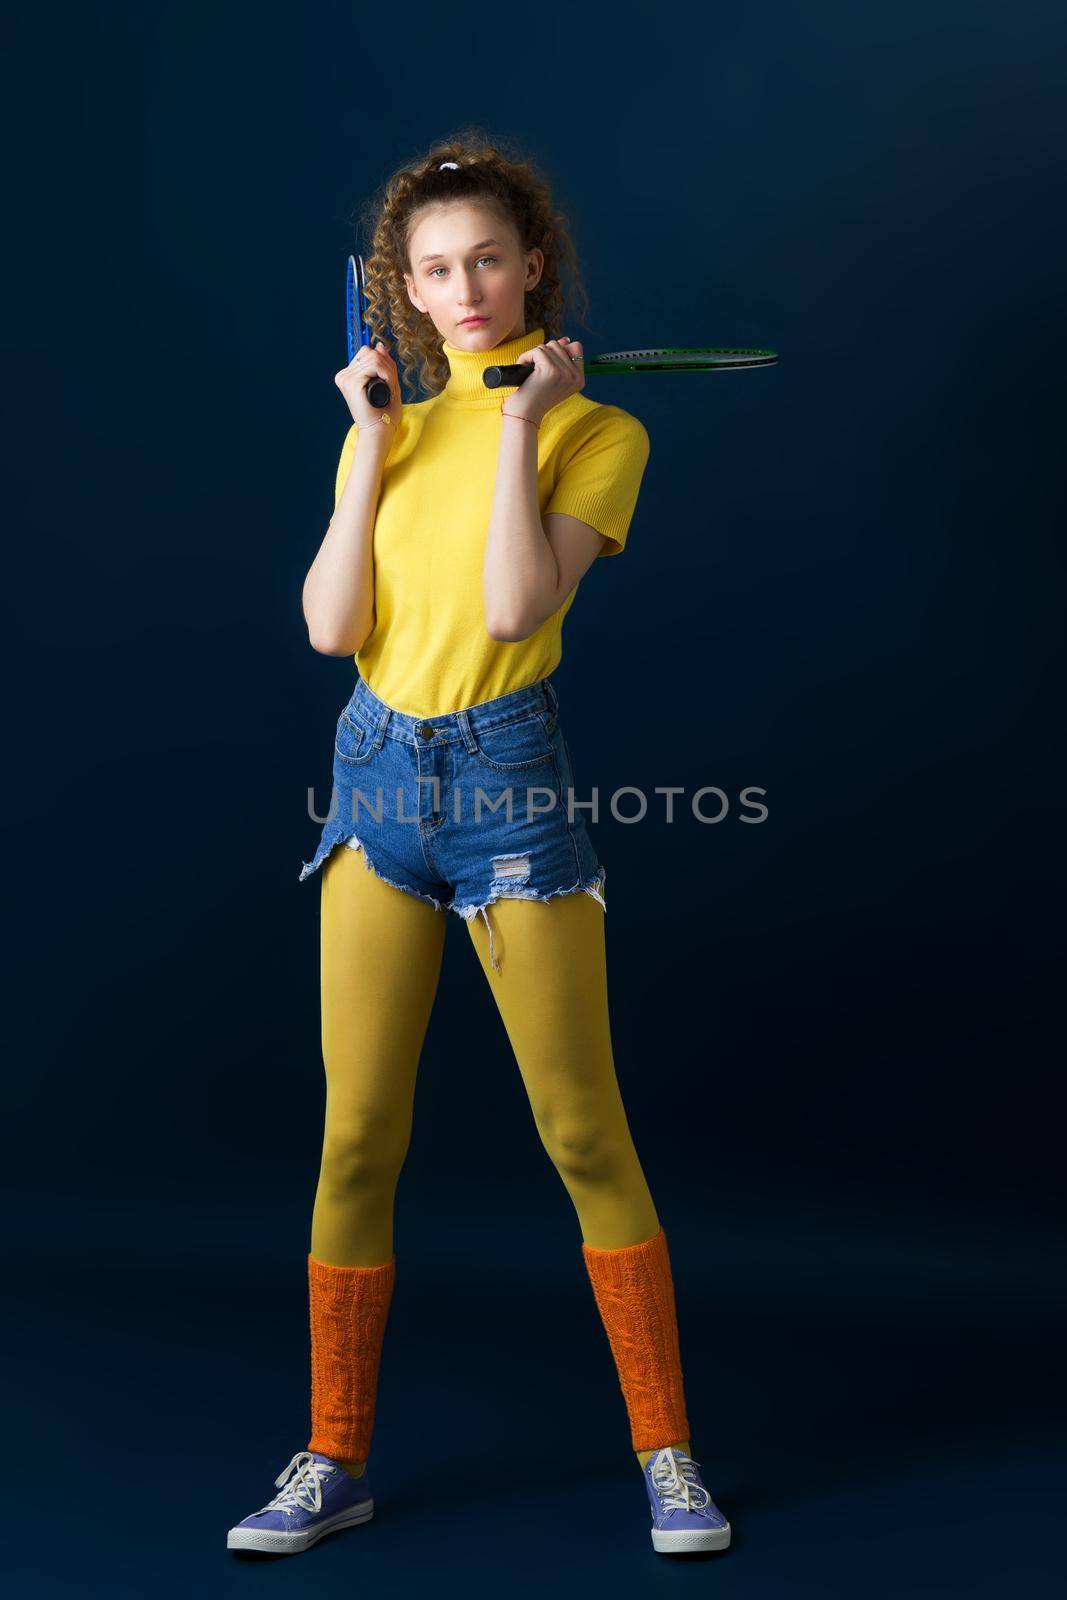 Shot of a beautiful tennis player holding a racket. Happy smiling girl doing sports in a bright yellow turtleneck, leggings, shorts and socks, leggings posing on a blue background